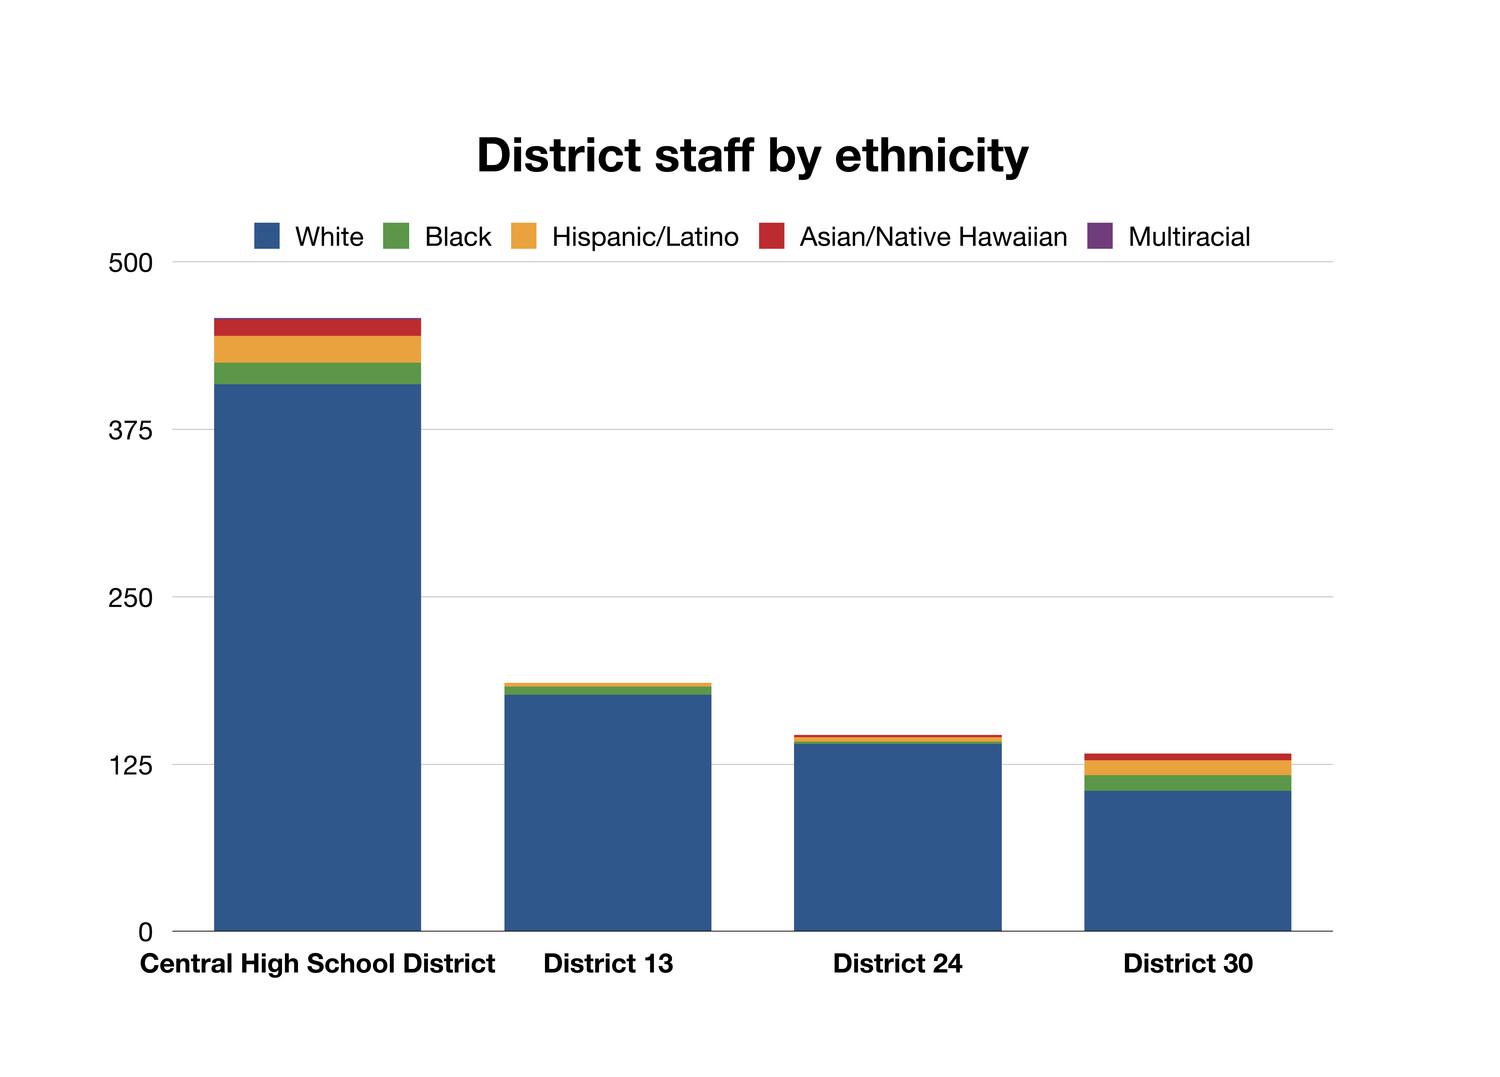 Professional staff counts are monitored internally by the school districts, and the most recent data is from the 2016-17 school year. There are no current employees in any of the four districts who identified as American Indian or Alaska Native.